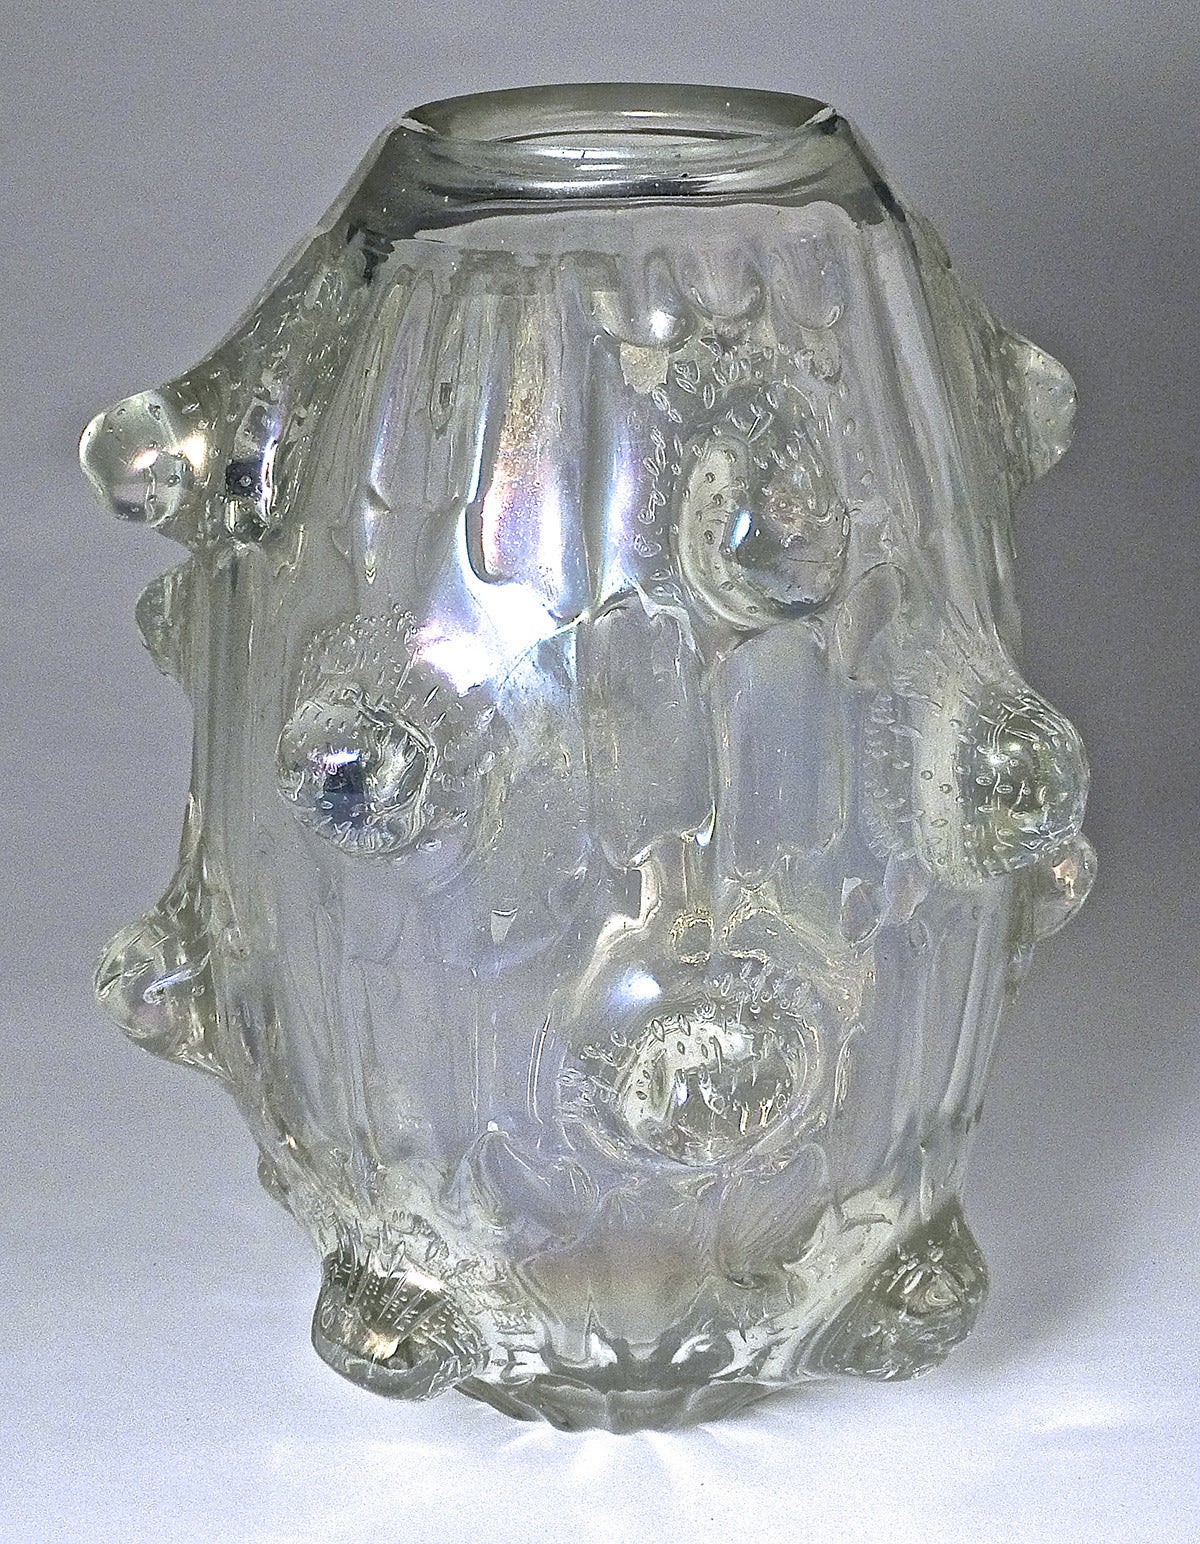 This vase is impressive both in size and beauty, circa 1940s.